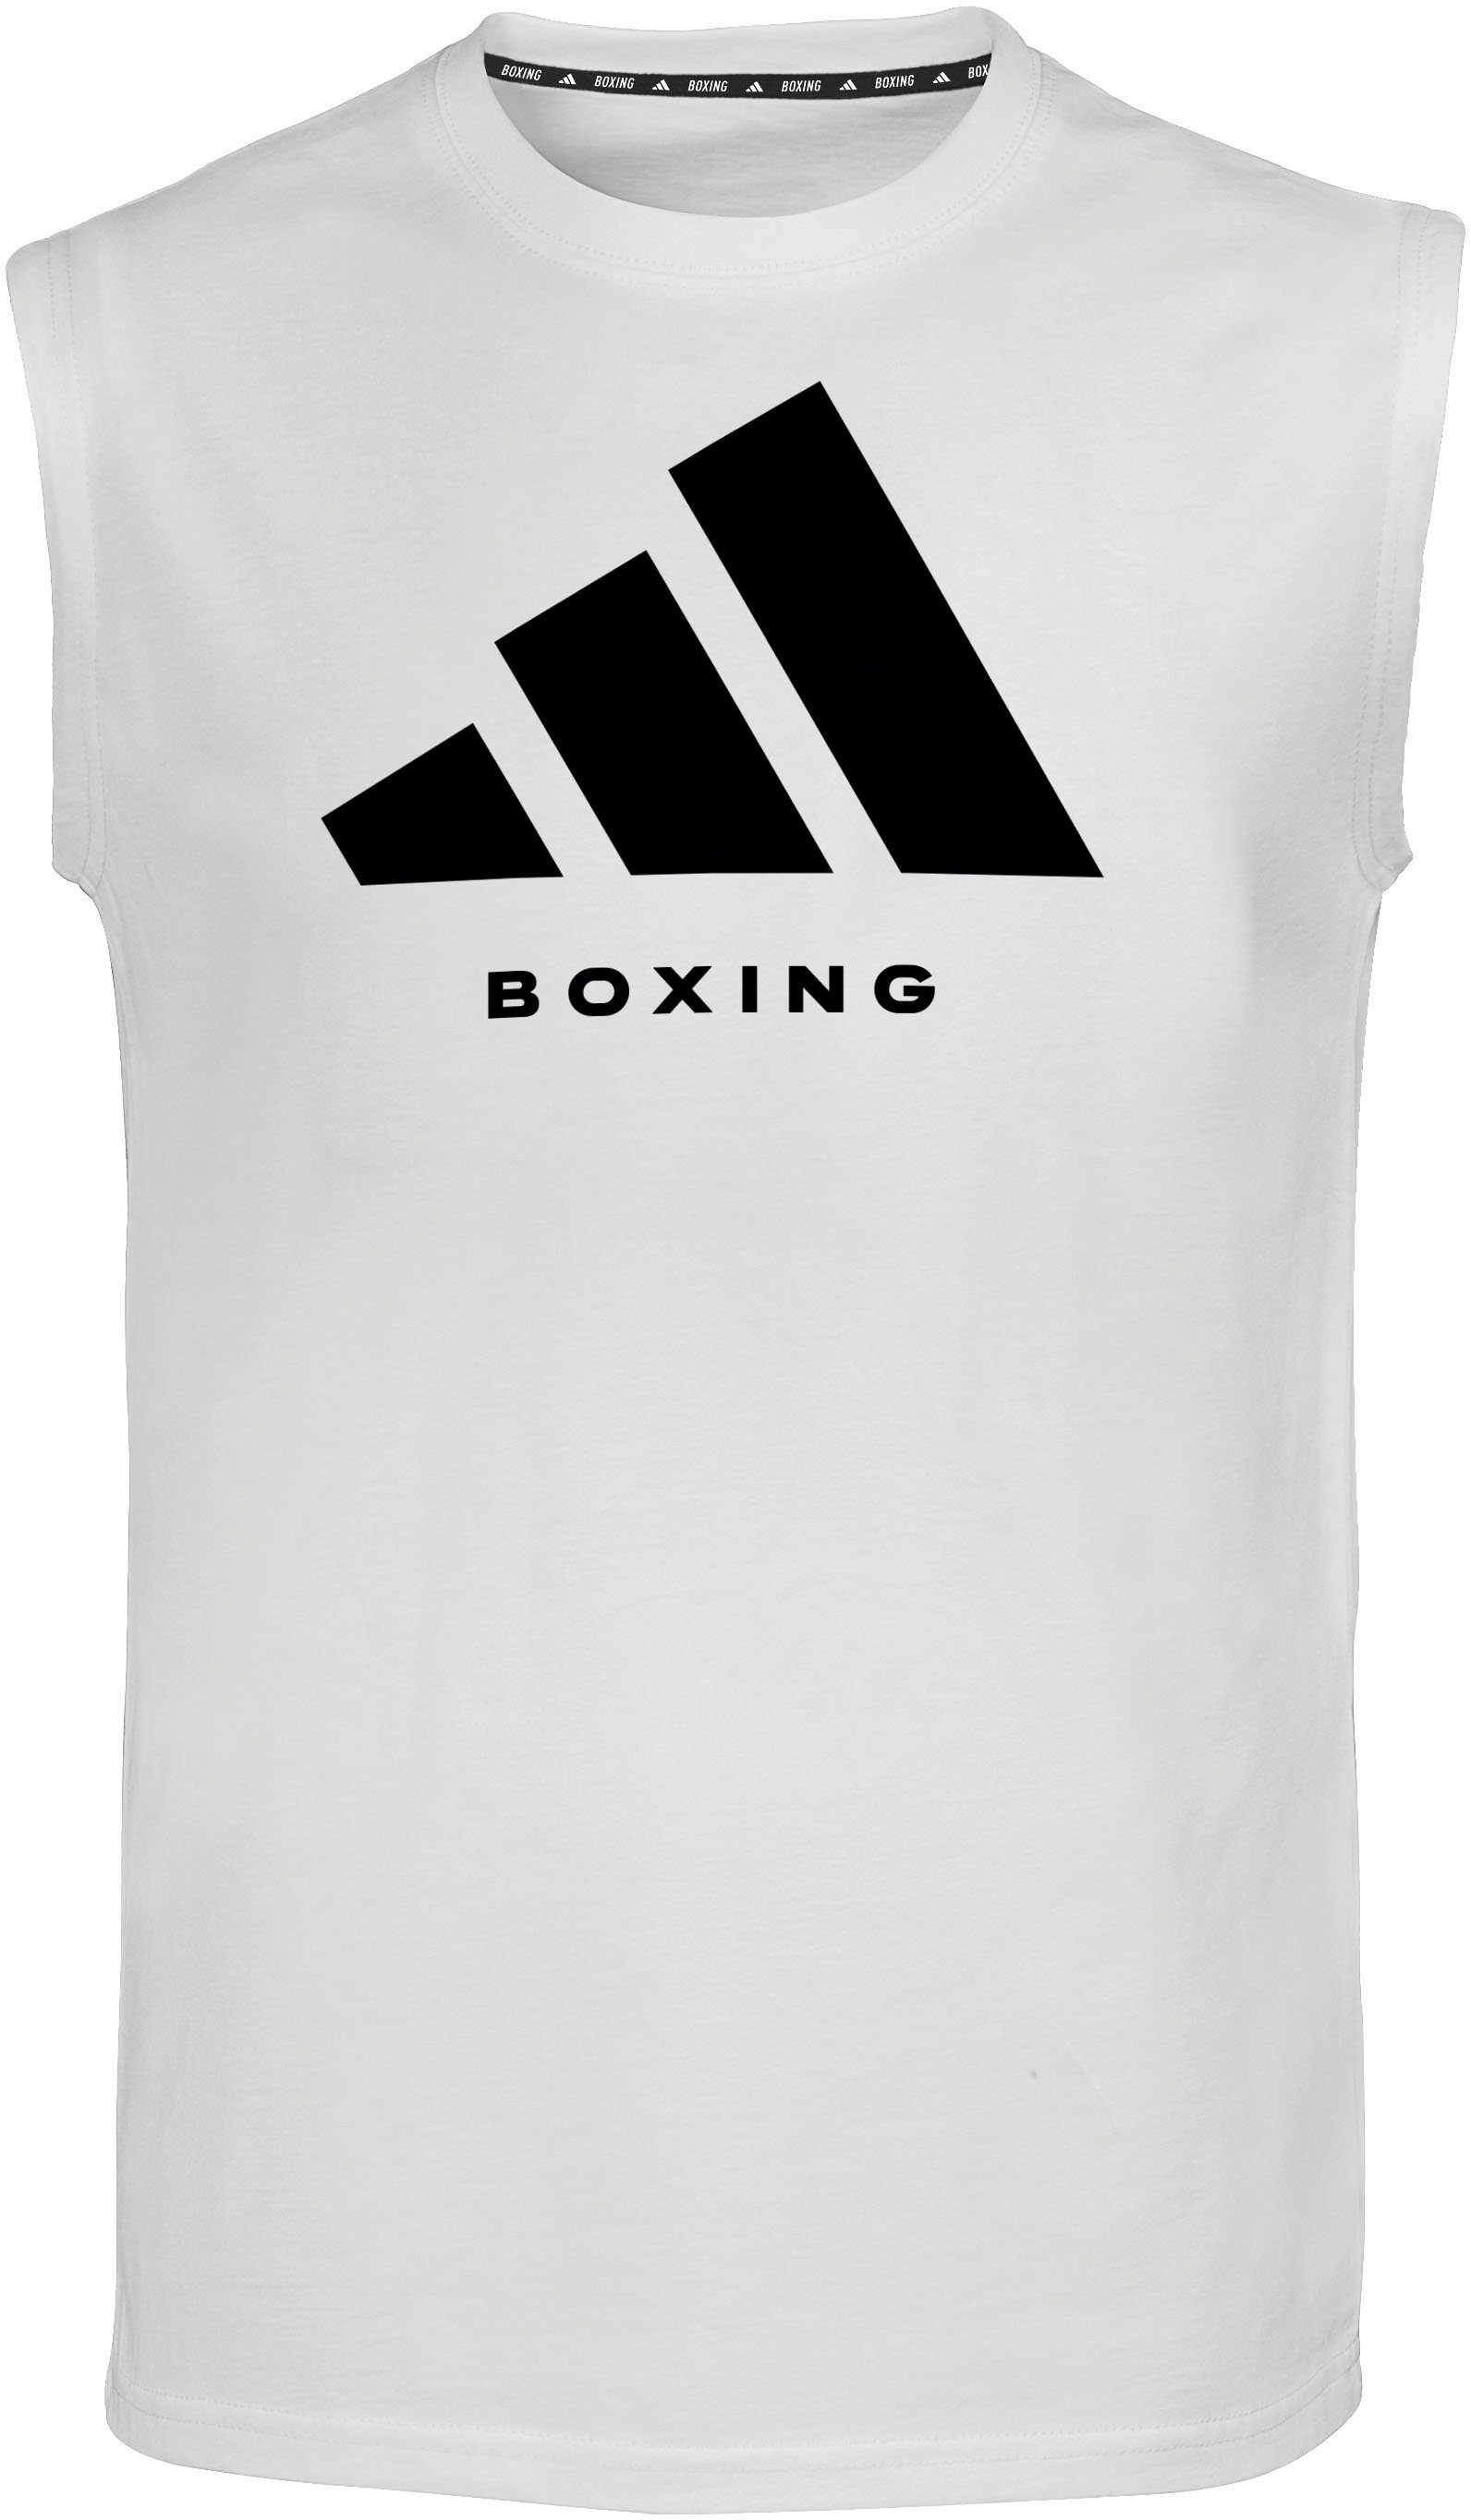 Tank adidas Muskelshirt Community Performance weiß Top Boxing